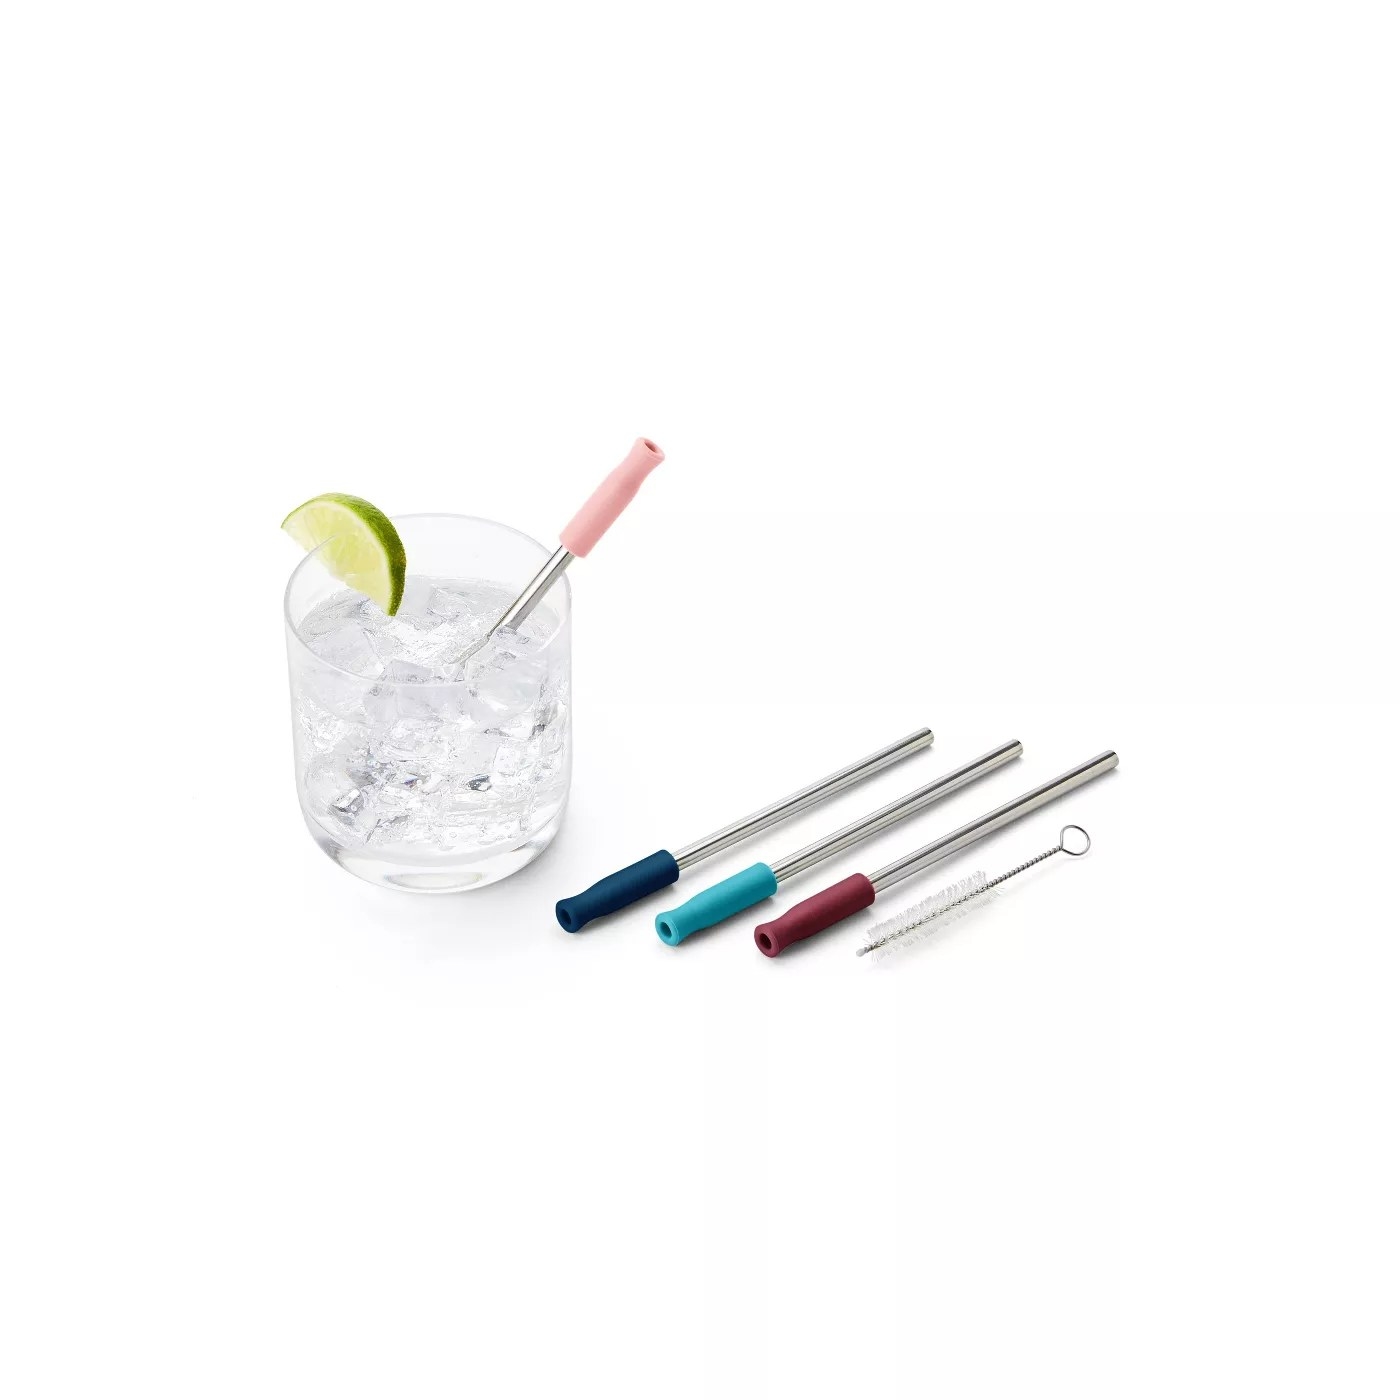 The metal straws with rubber tips and a cleaning brush